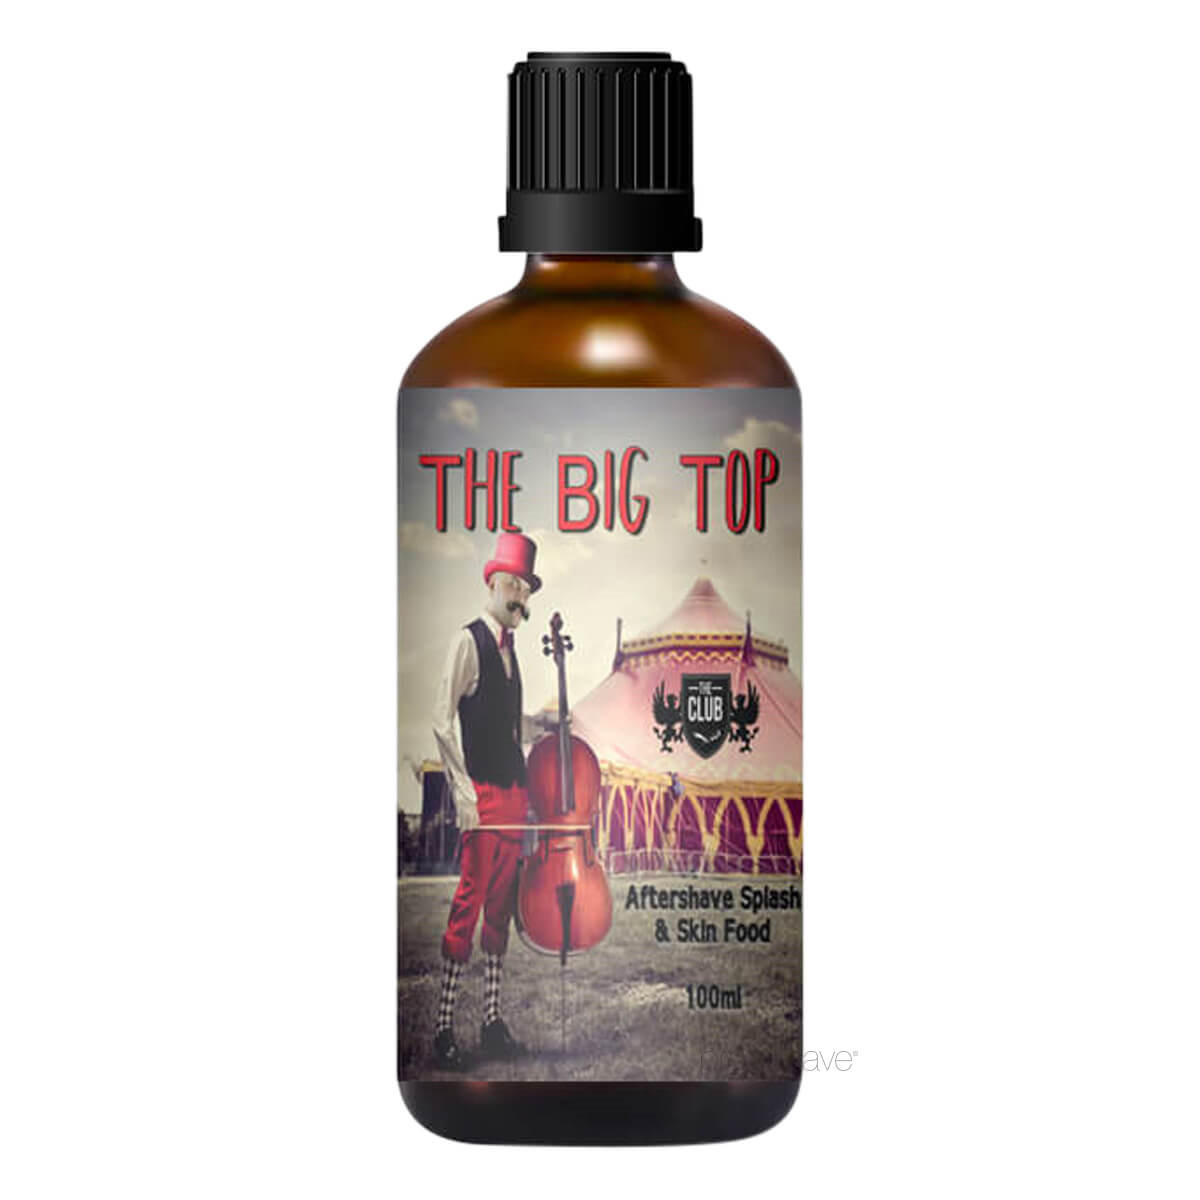 Ariana & Evans Aftershave, The Big Top, 100 ml.